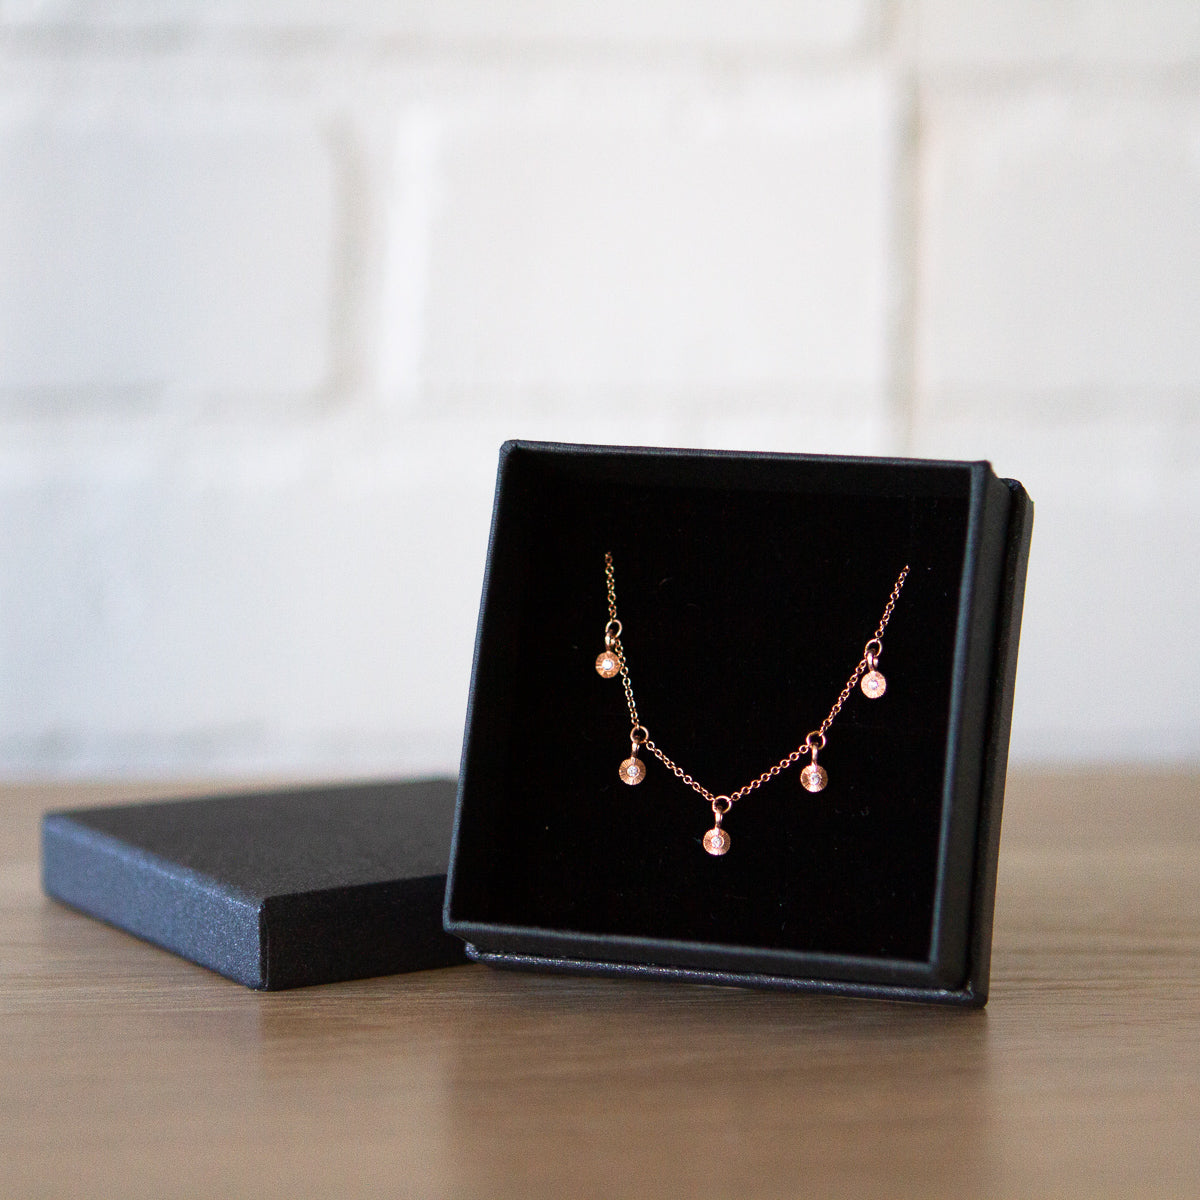 Rose gold and diamond station necklace with five tiny engraved pendants with diamond centers in a gift box